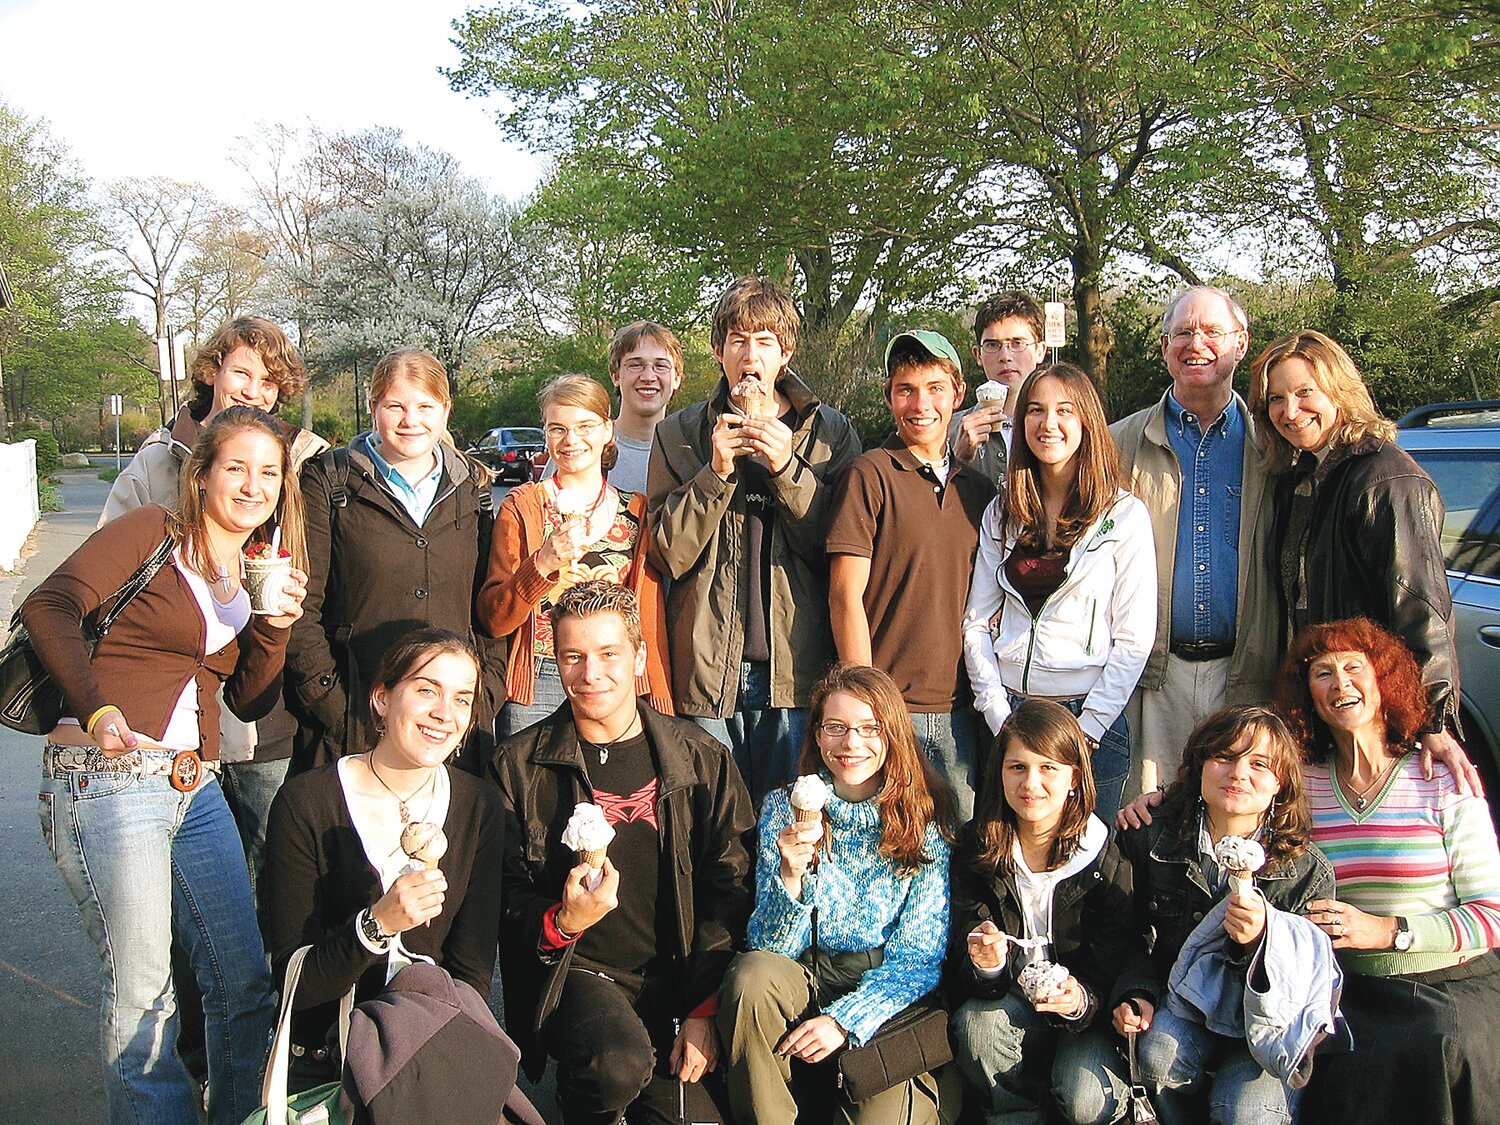 Tim Averill is a retired storied teacher who created a nationally recognized high school debate team.  His former students raised an endowment to start a scholarship he manages today as part of MEEF.  Tim and Lauren Averill (upper right) with Manchester Essex debaters in 2005 (Cody, Dixon, Cellucci, Cowman) and the German exchange debaters and their chaperone Vera (lower right).  Courtesy Photo (Courtesy Photo)